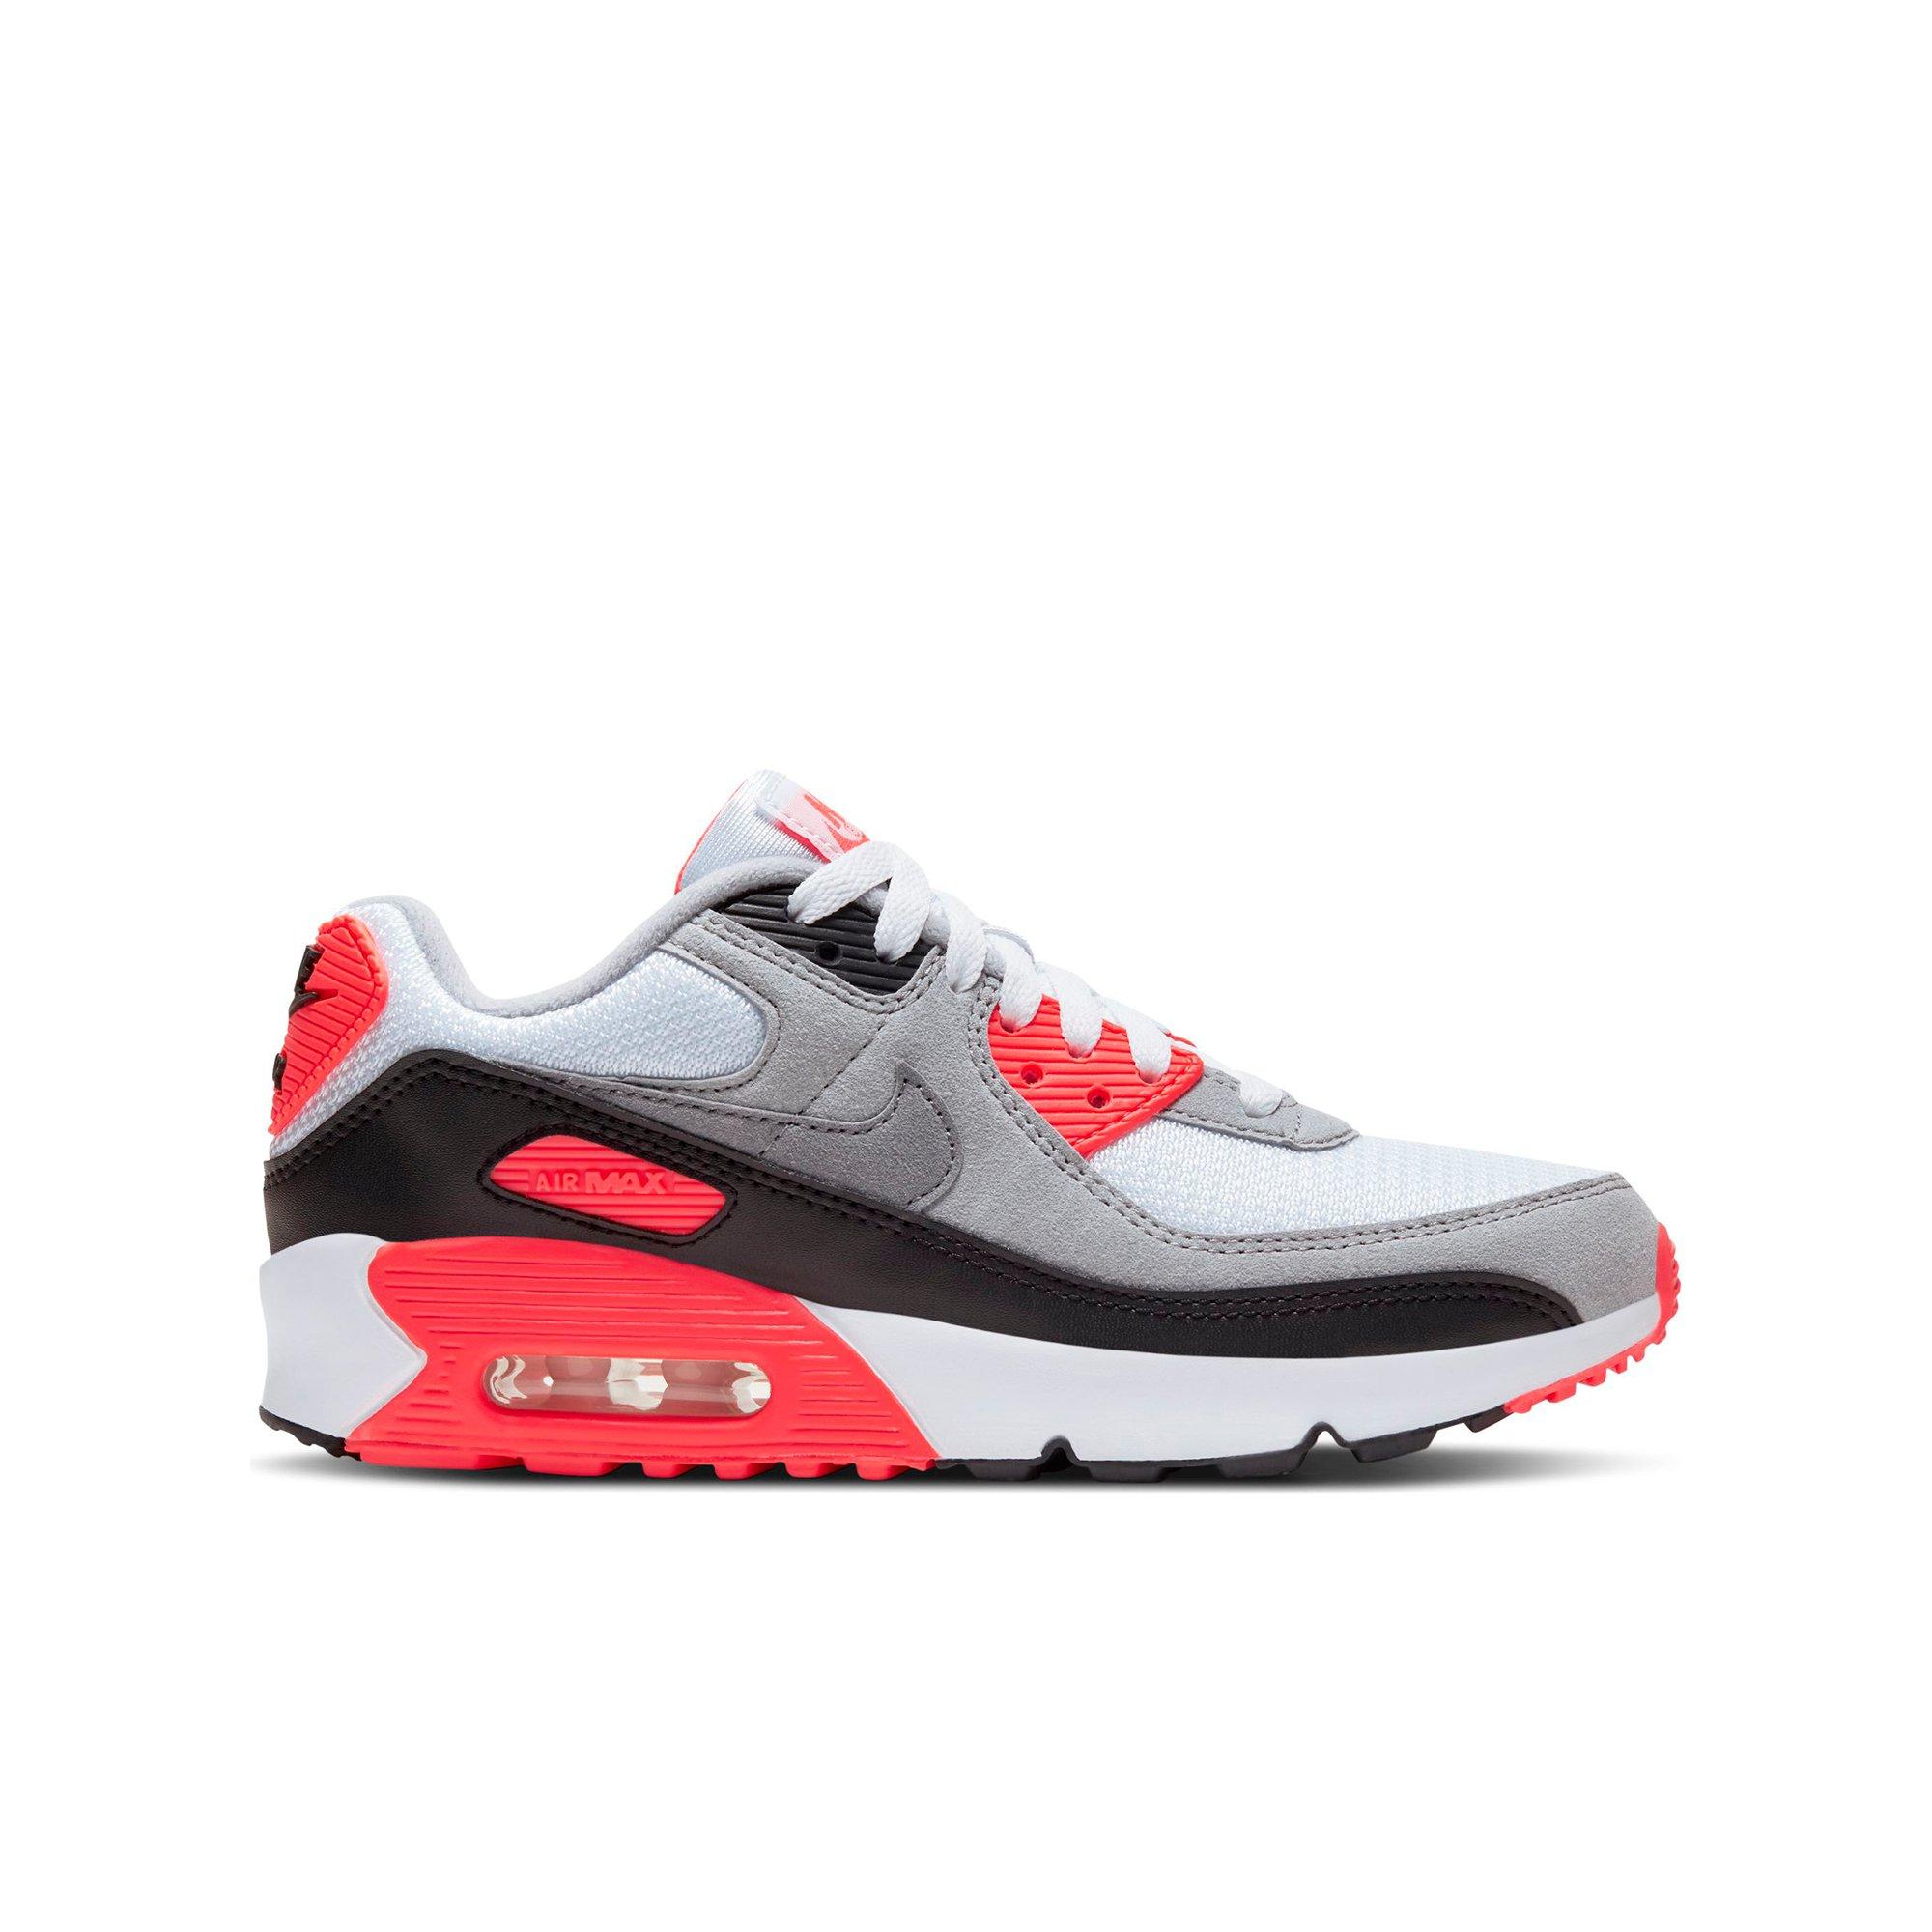 red air max youth